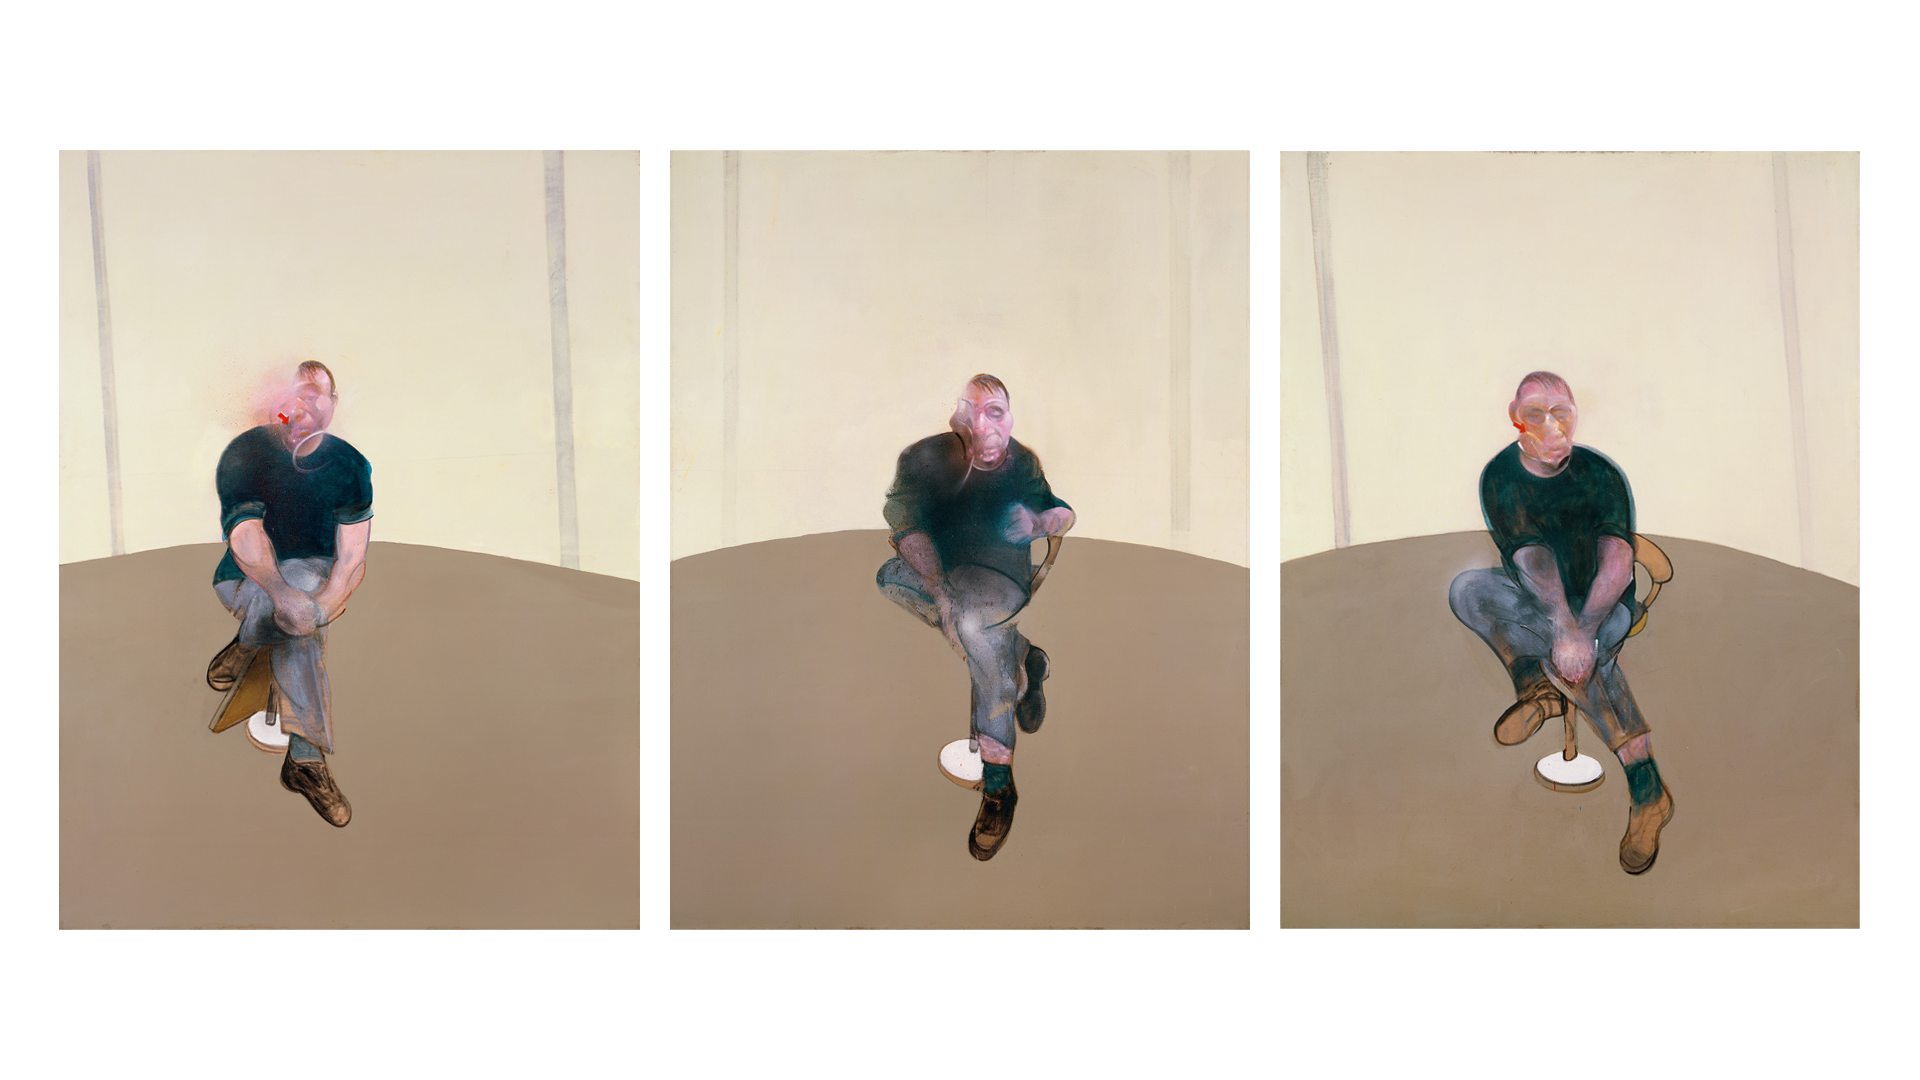 Study for a Self-Portrait, Triptych, 1985-6. Oil and aerosol paint on canvas. CR 86-02. © The Estate of Francis Bacon / DACS London 2020. All rights reserved.